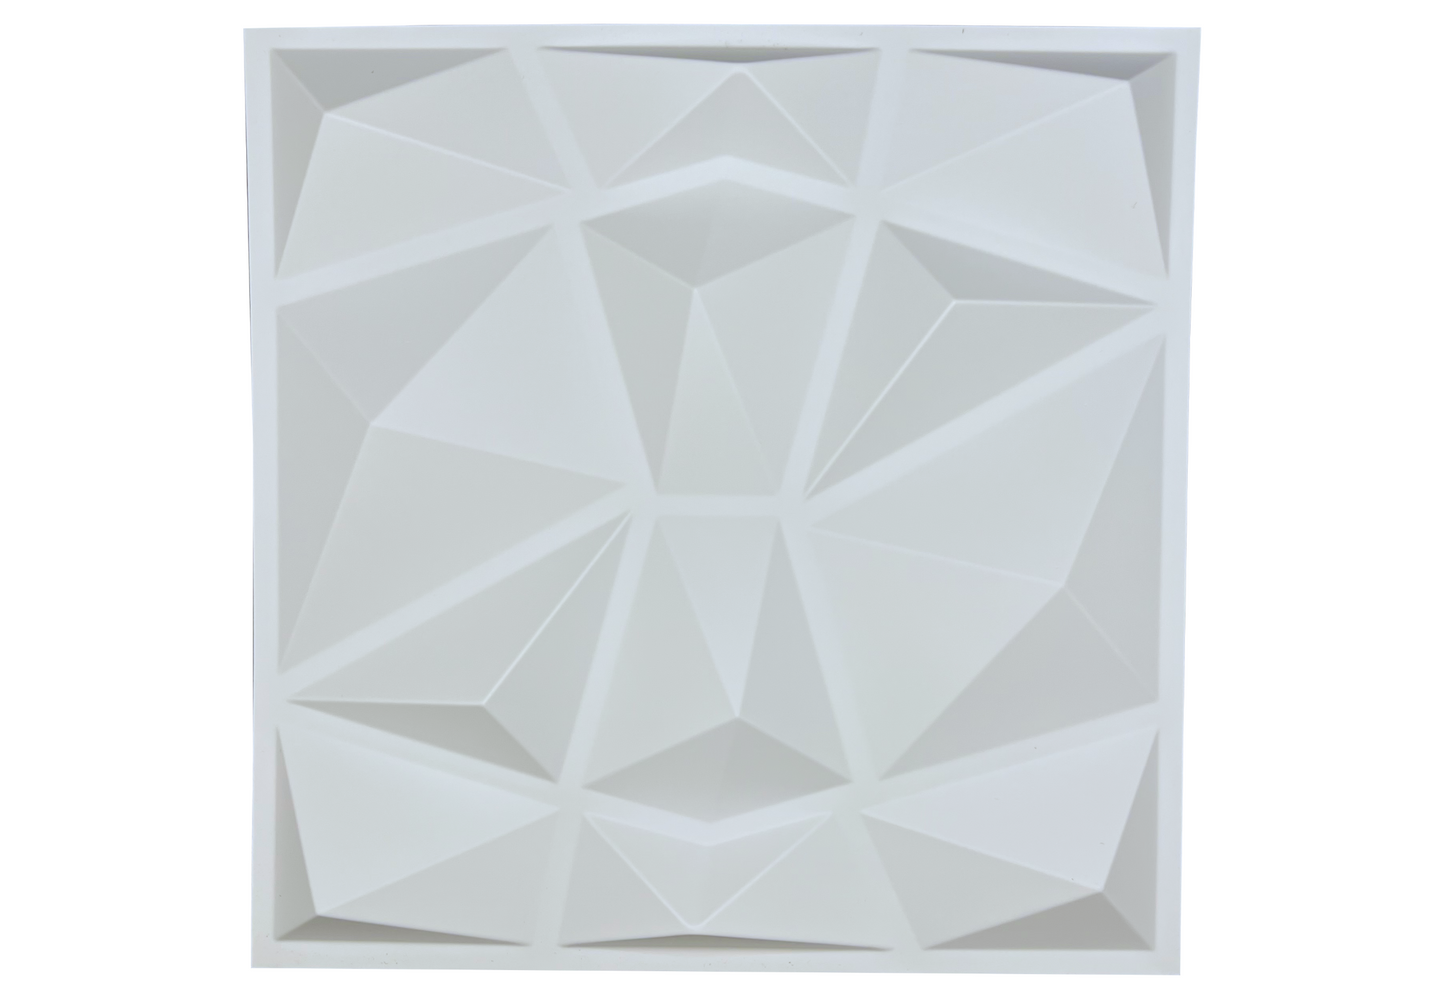 12 Pack - PVC Geometric 3D Wall Panel For Sound Diffusion - Modern 3D Design For Walls And Ceilings